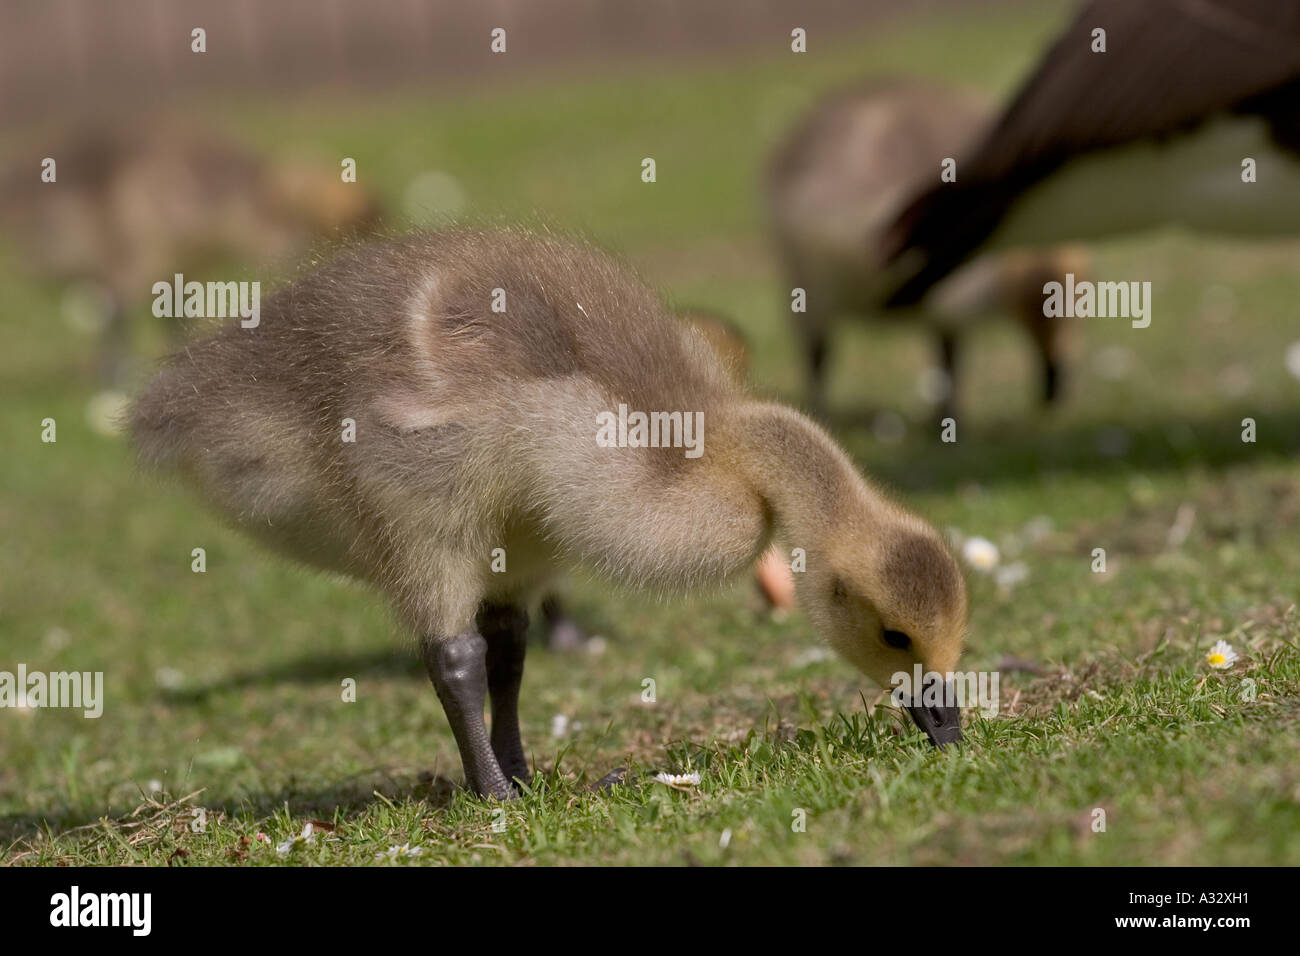 Canada goose gosling nibbling on grass Stock Photo